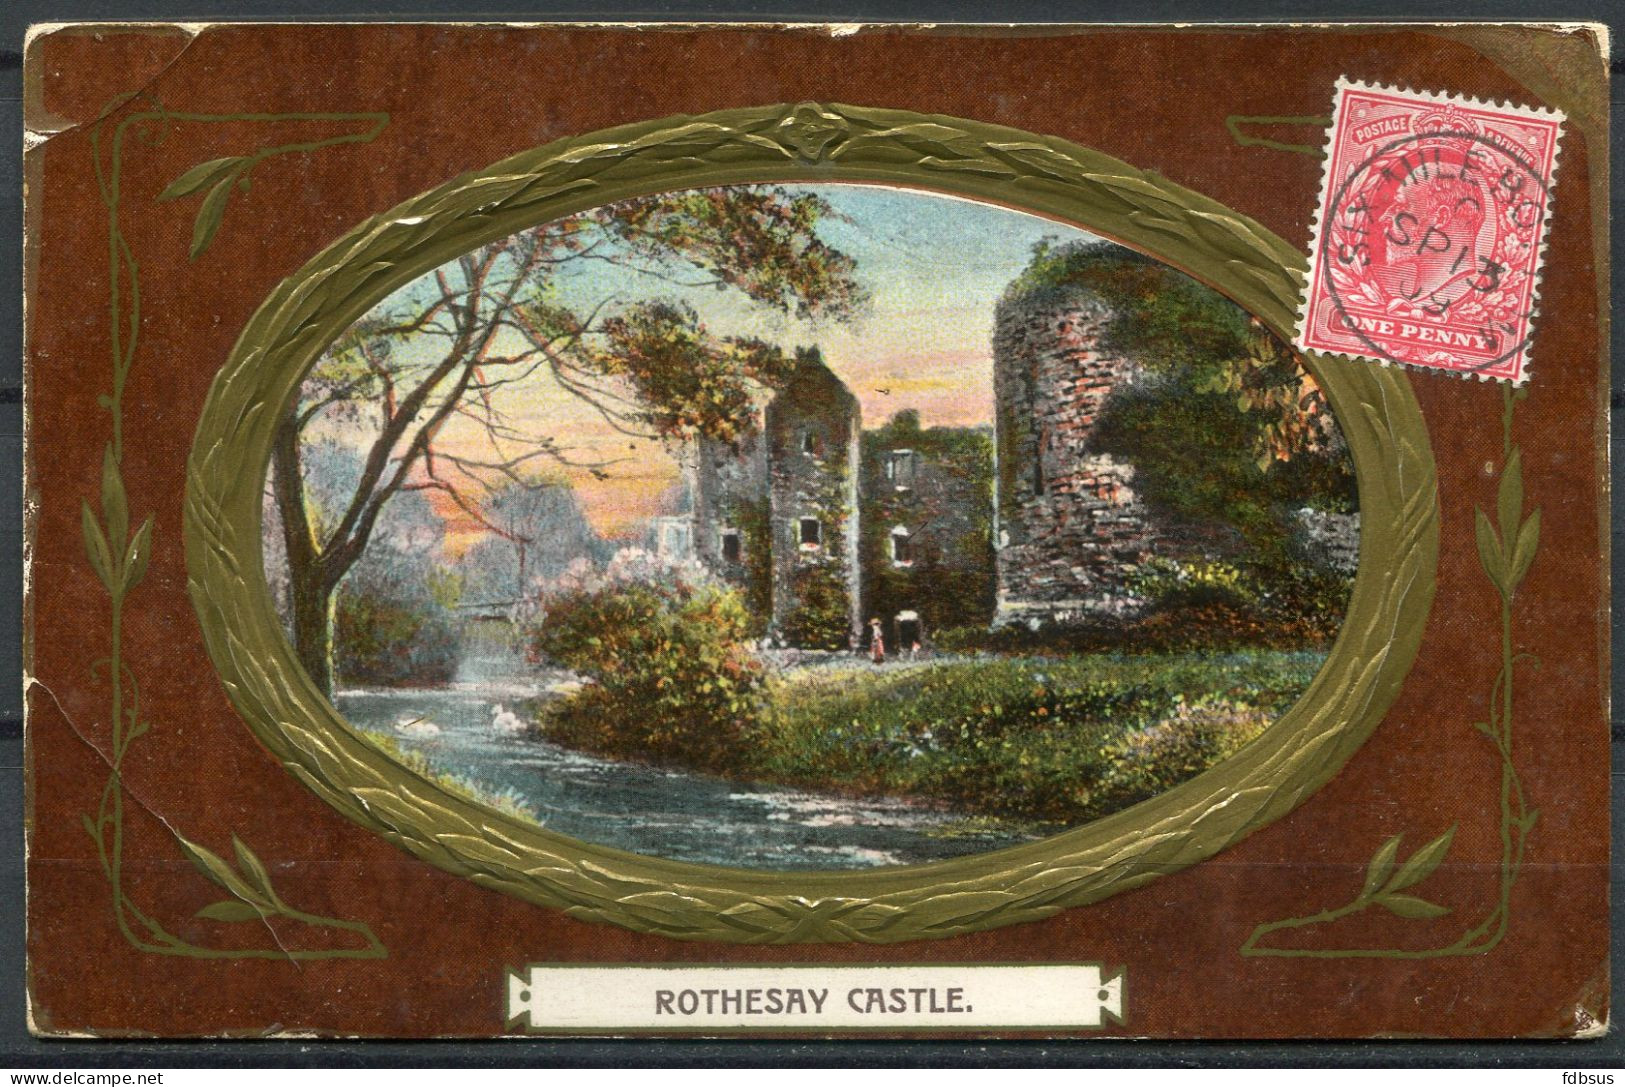 1909 Rothesay Castle - Gefr. One Penny + Stempel Six Mile Bottom - Bute